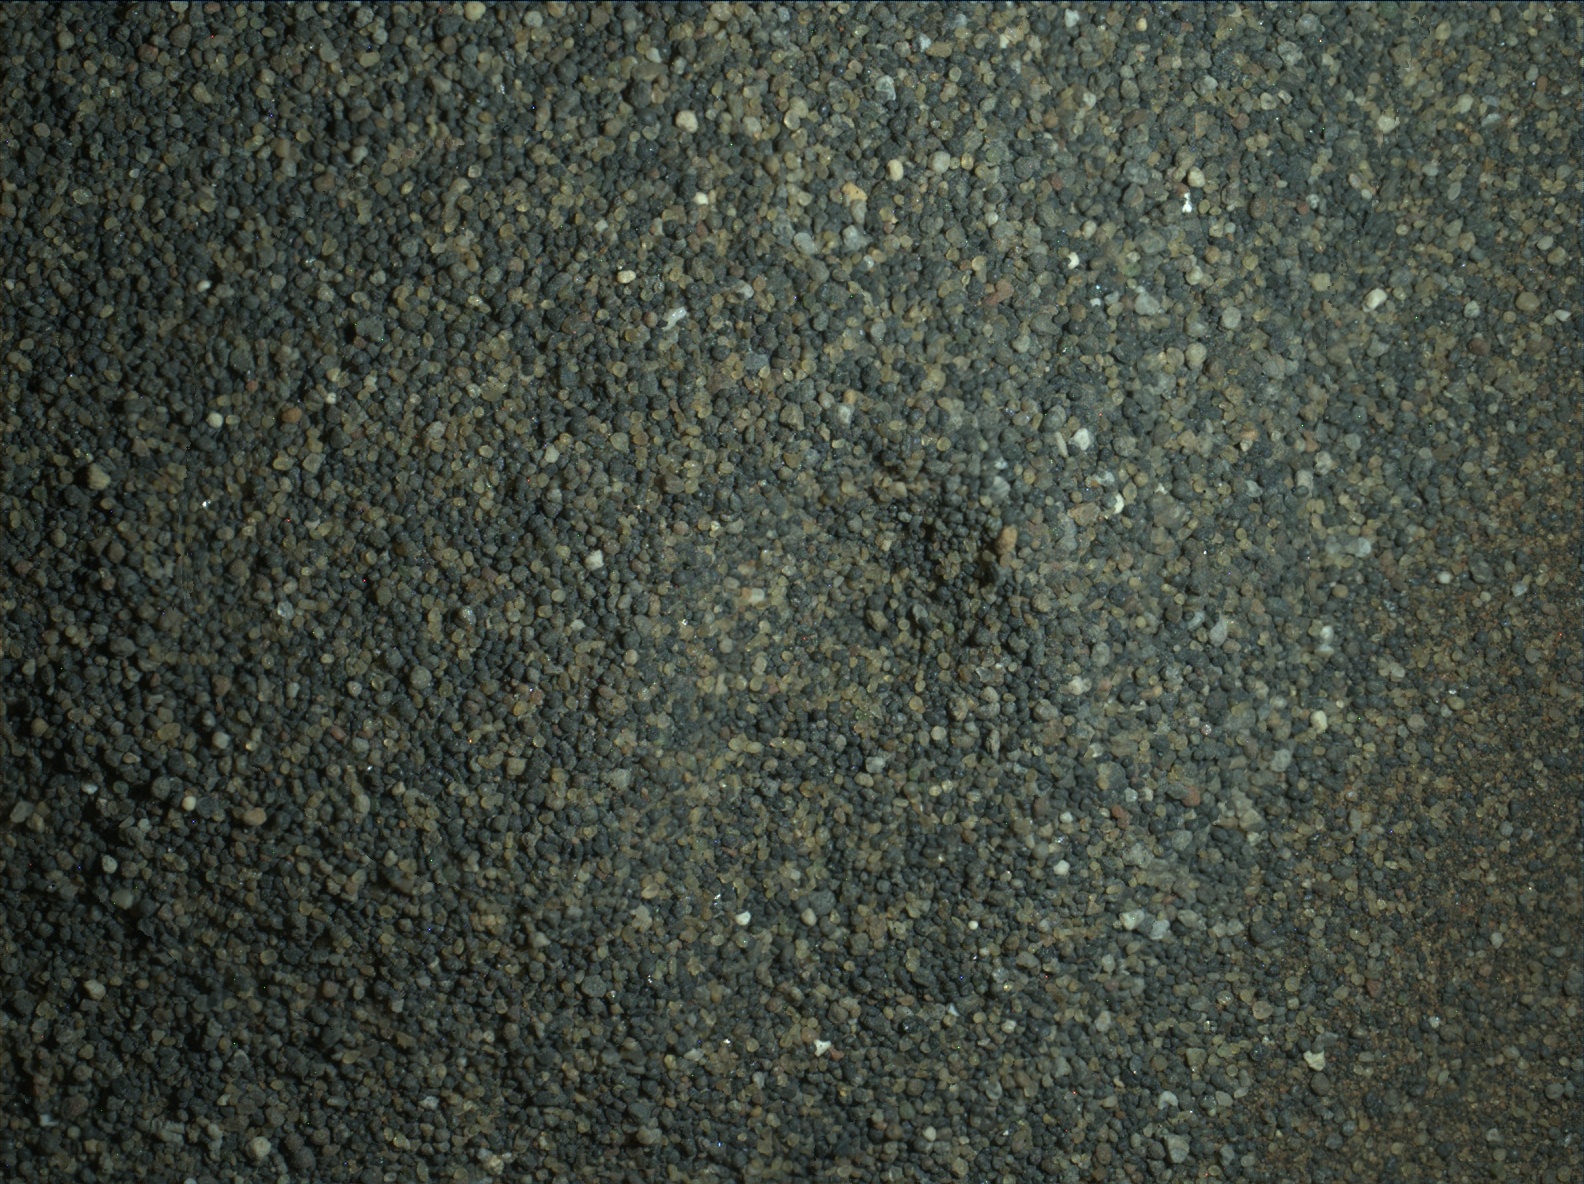 The Mars Hand Lens Imager (MAHLI) camera on the robotic arm of NASA's Curiosity Mars rover used electric lights at night on Jan. 22, 2016, to illuminate this postage-stamp-size view of Martian sand grains dumped on the ground after sorting with a sieve.